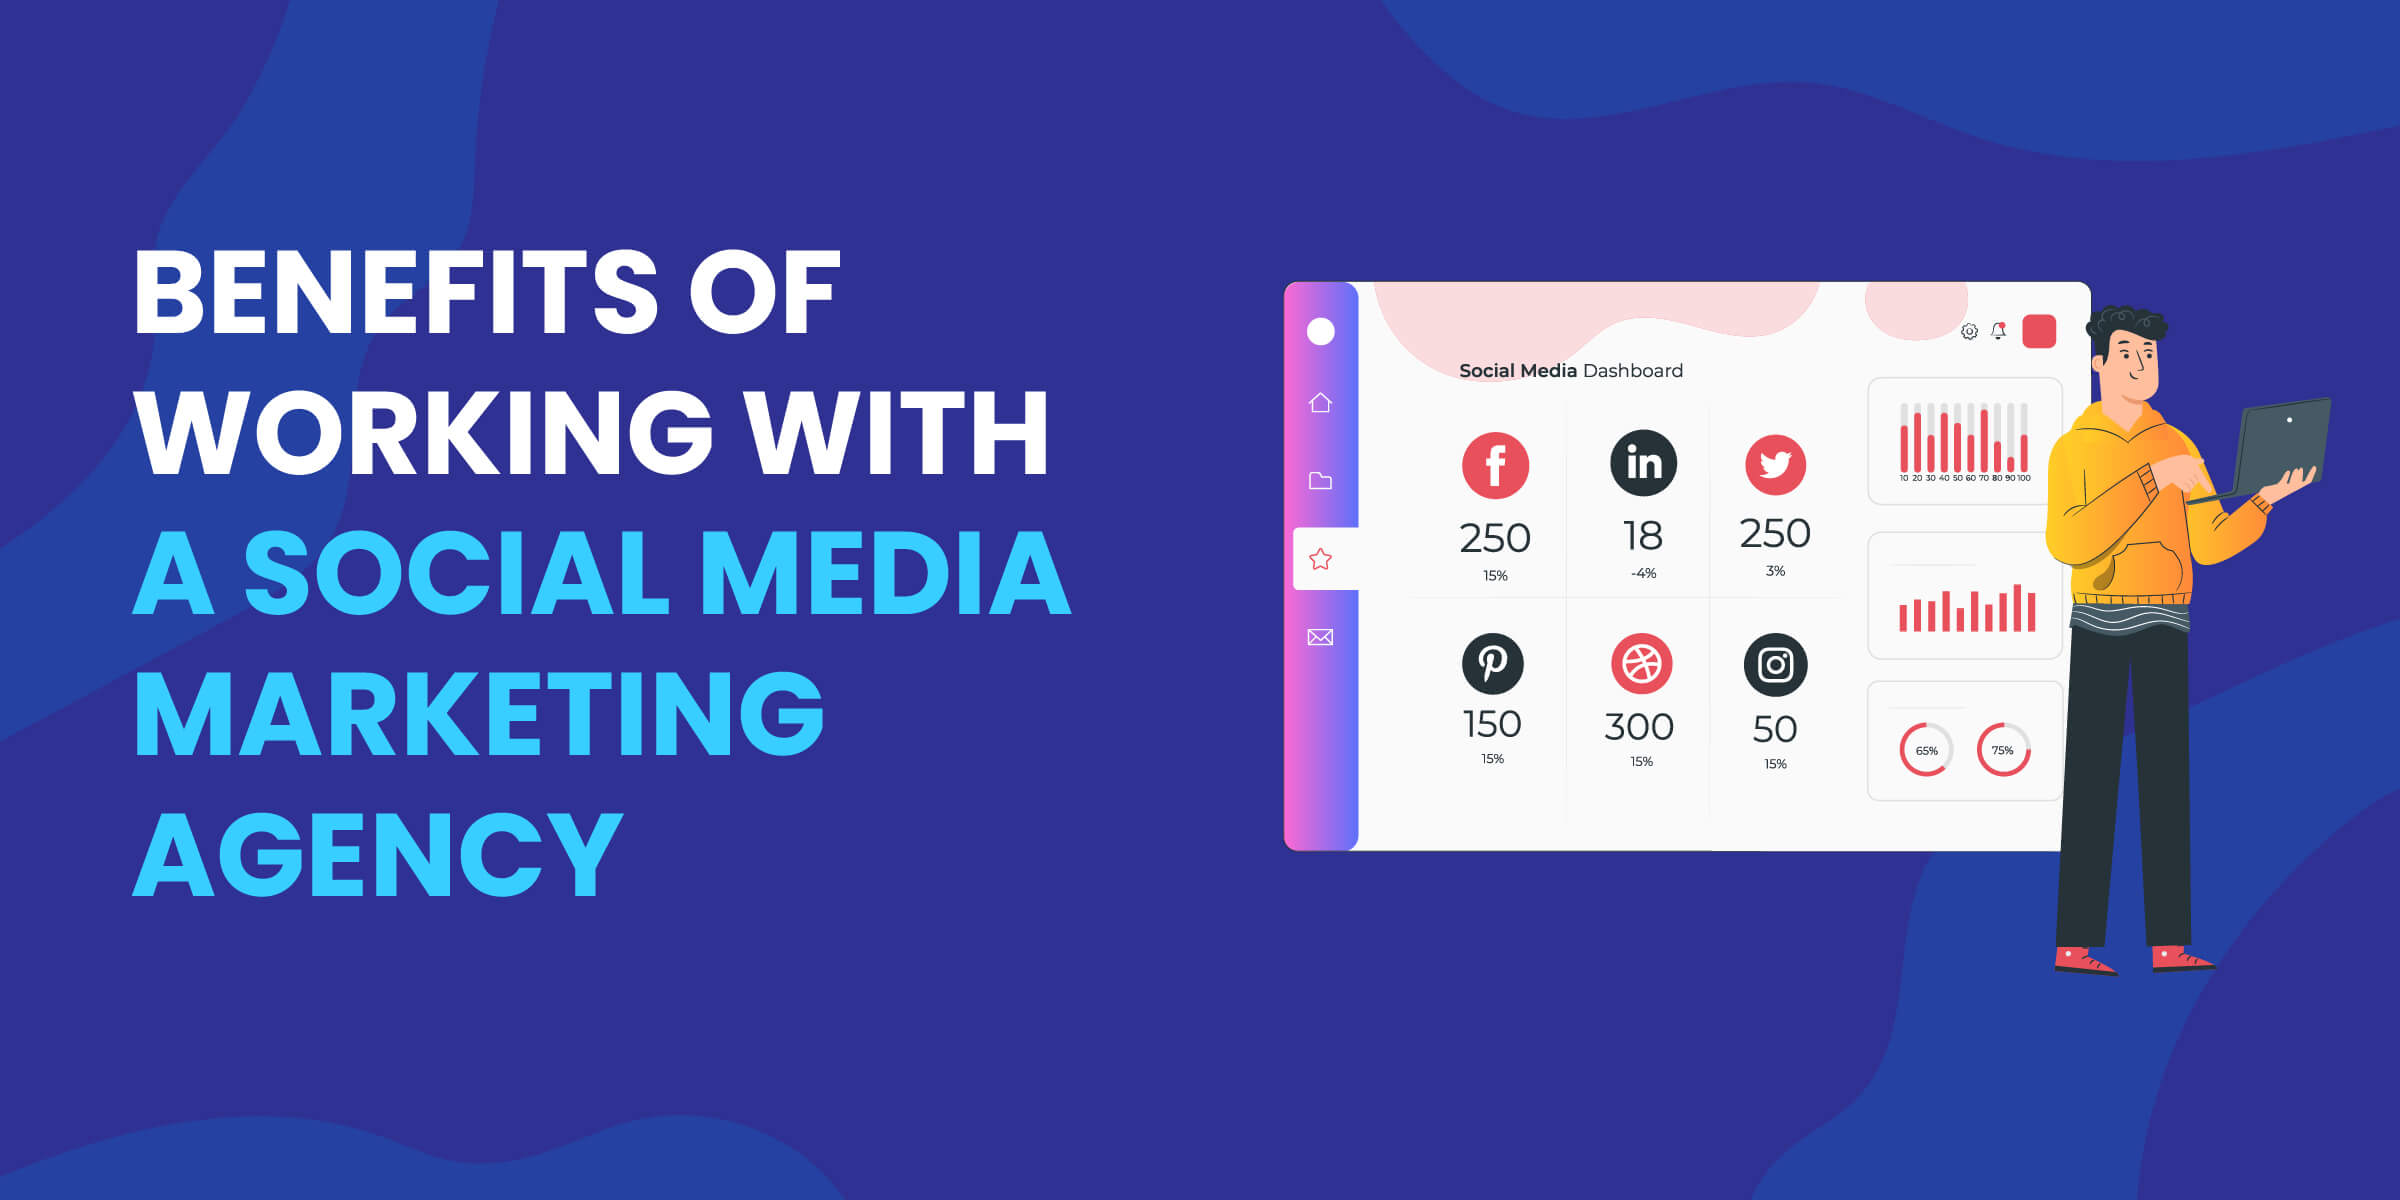 Benefits of Working with Social Media Marketing Agency